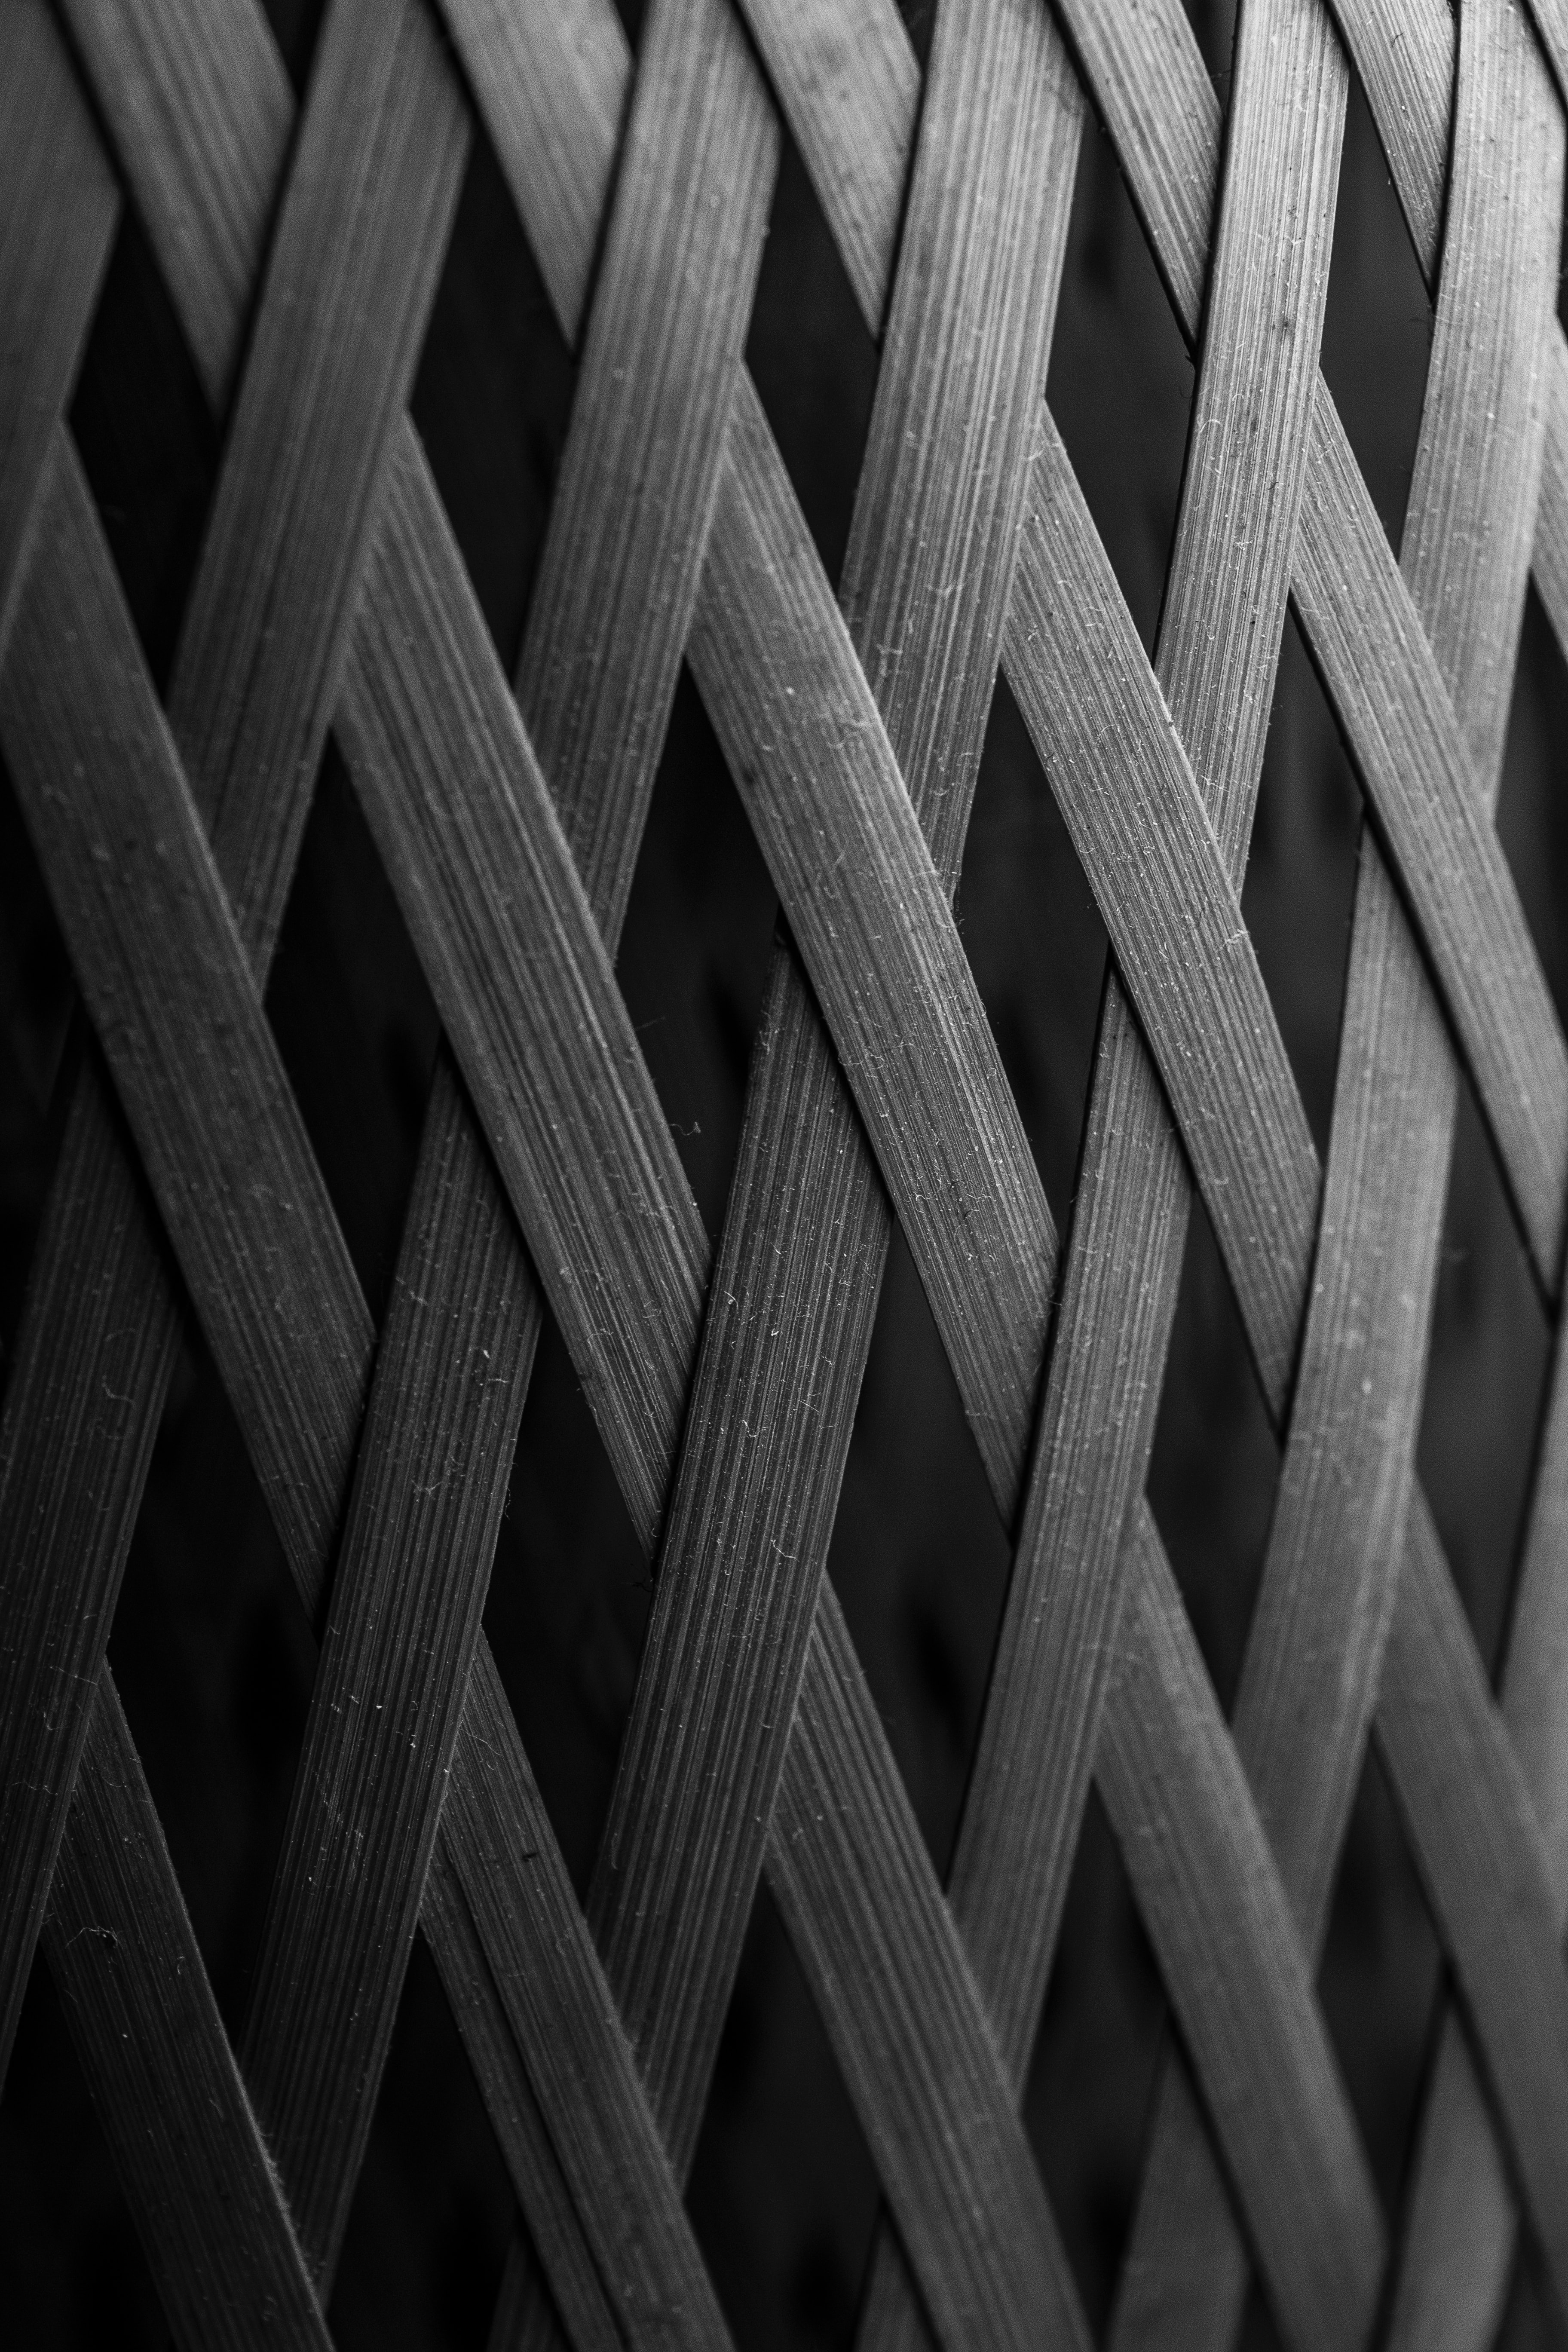 facade, wooden, chb, texture, wood, textures, fence, bw Full HD